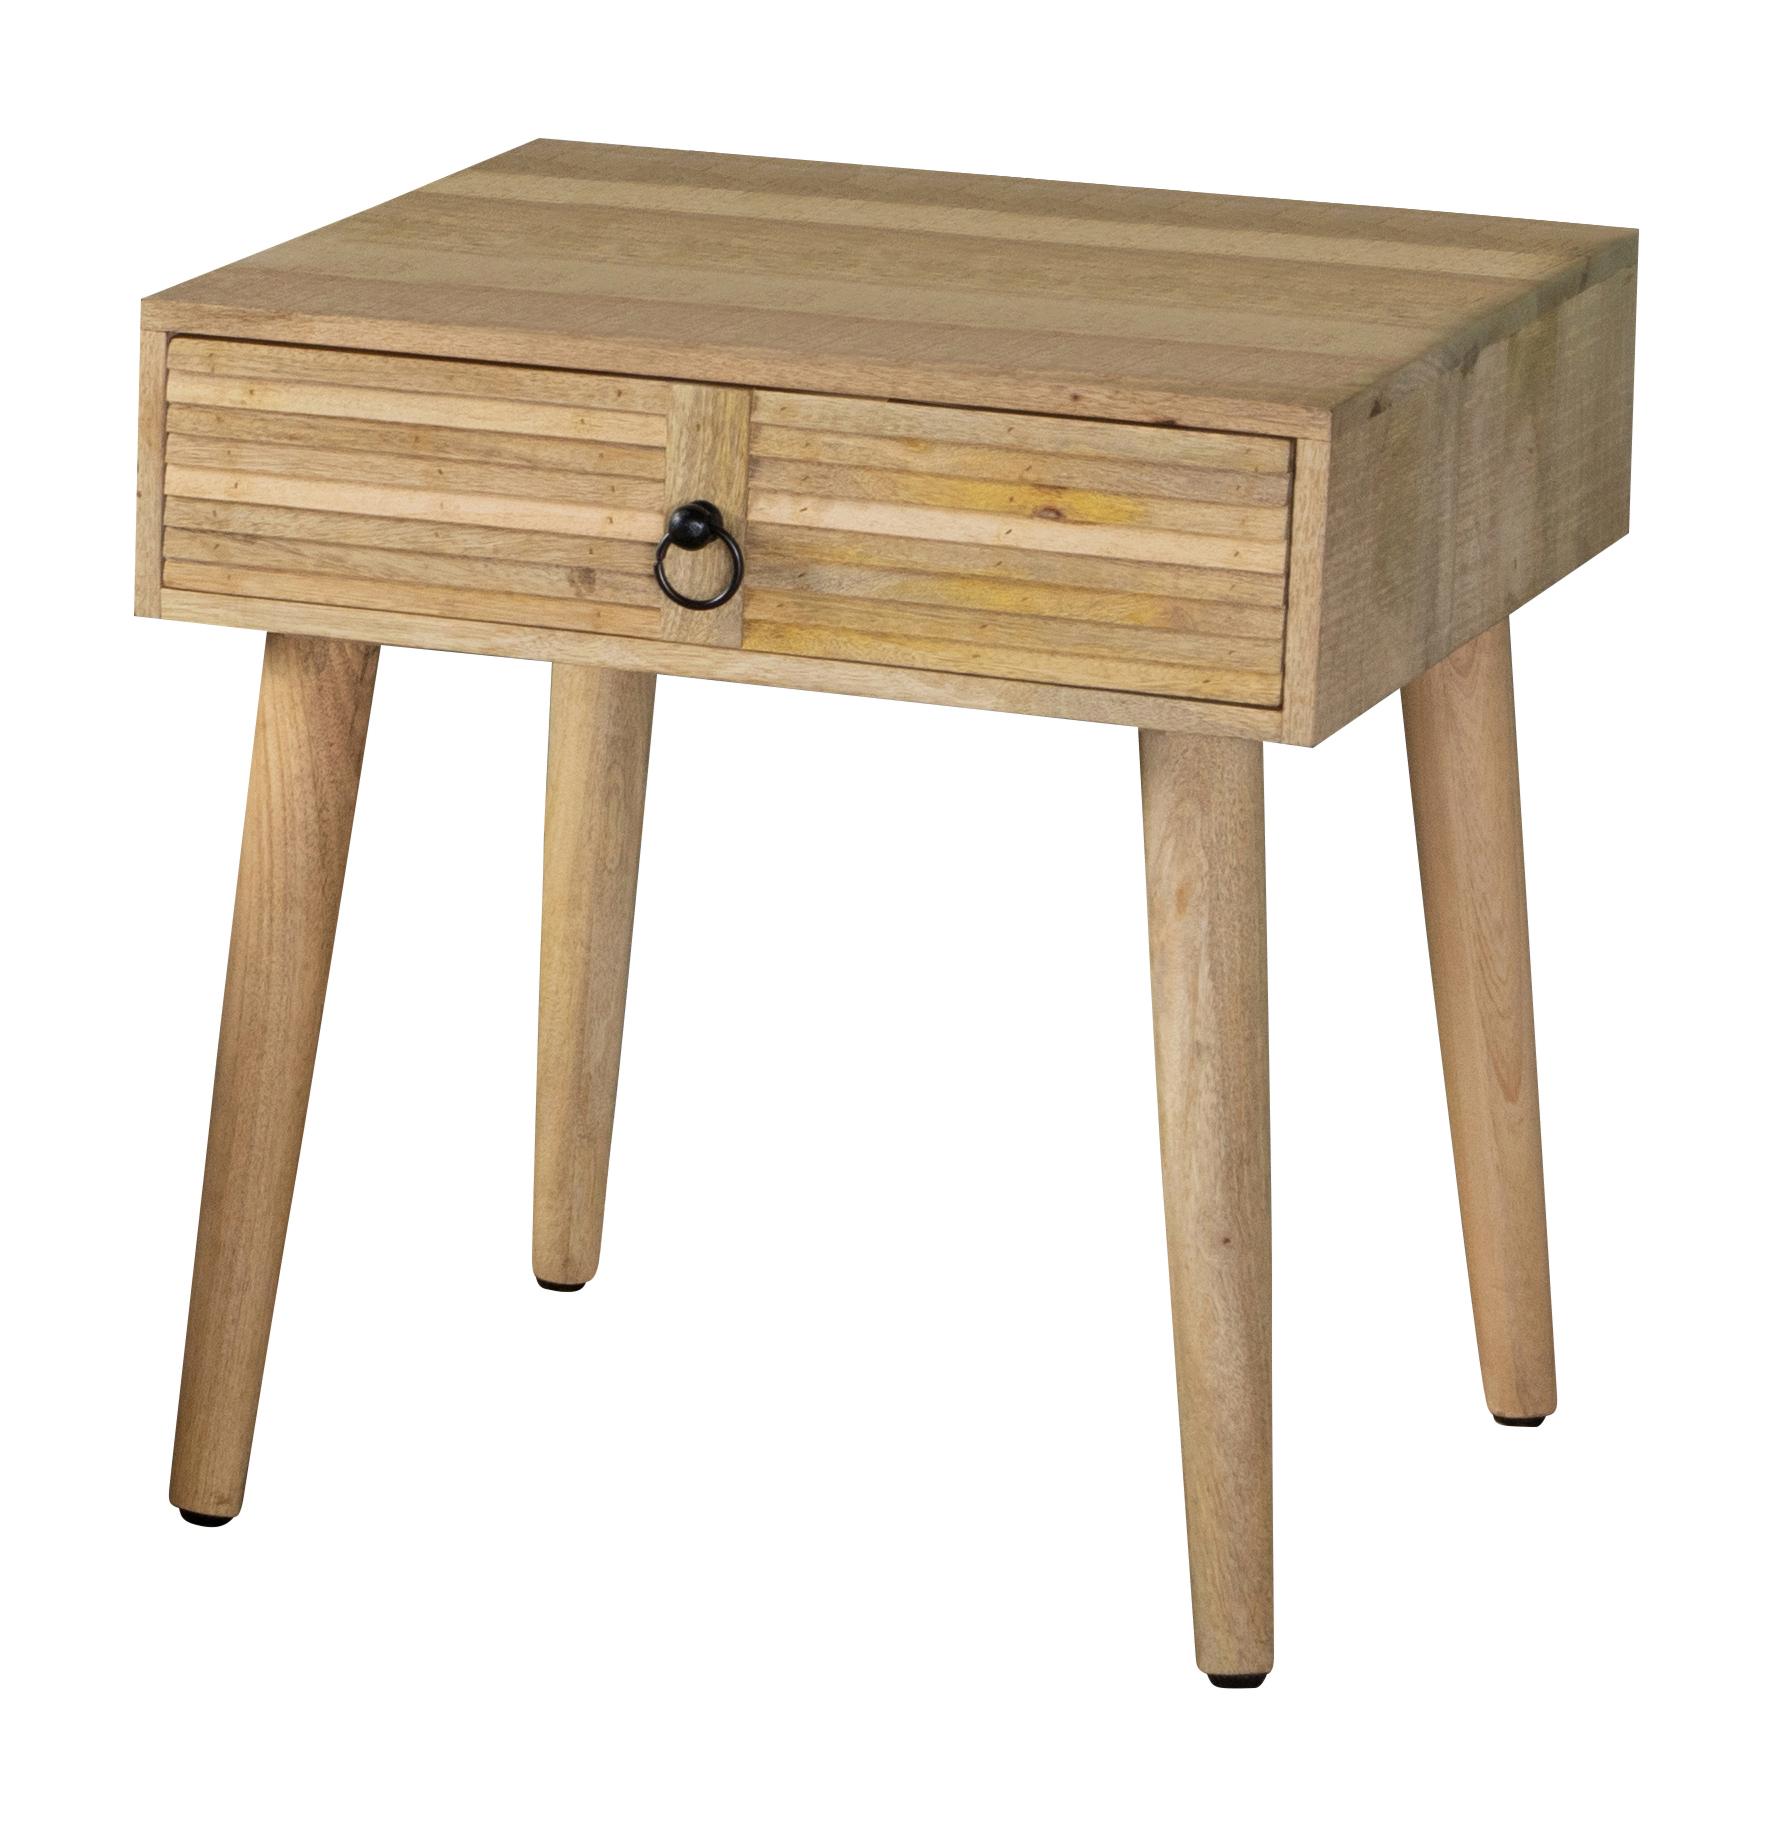 Transitional End Table 724257 724257 in Natural 